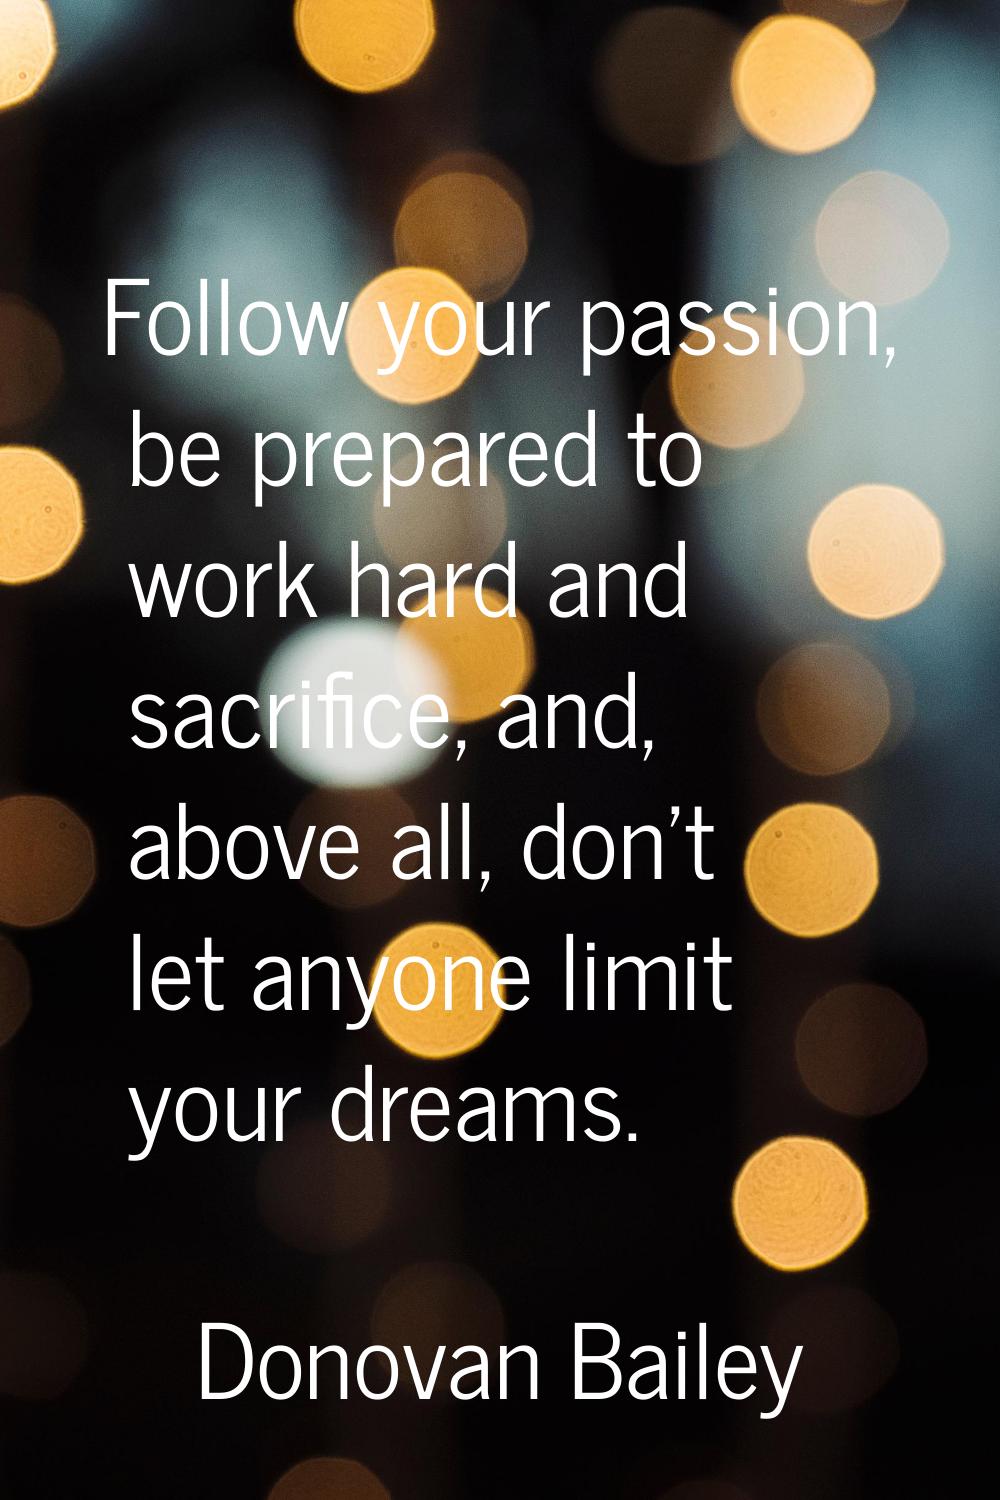 Follow your passion, be prepared to work hard and sacrifice, and, above all, don't let anyone limit